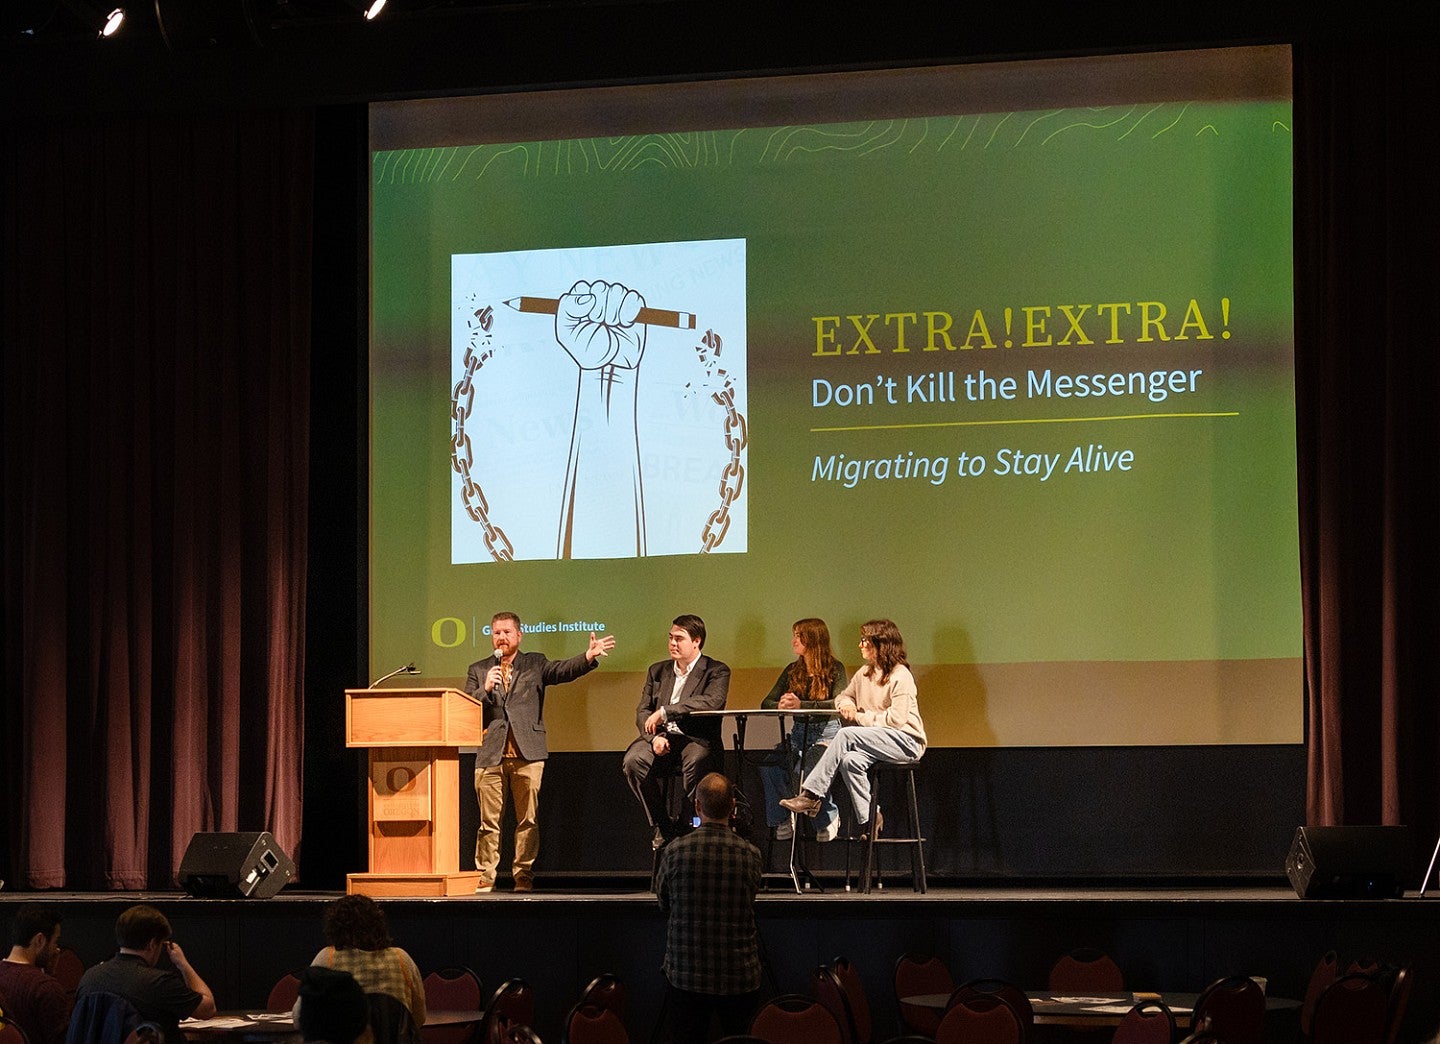 Professor Charlie Deitz introduces three SOJC students sitting on stage in front of a large screen that says "Extra! Extra! Don't Kill the Messenger; Migrating to Stay Alive"